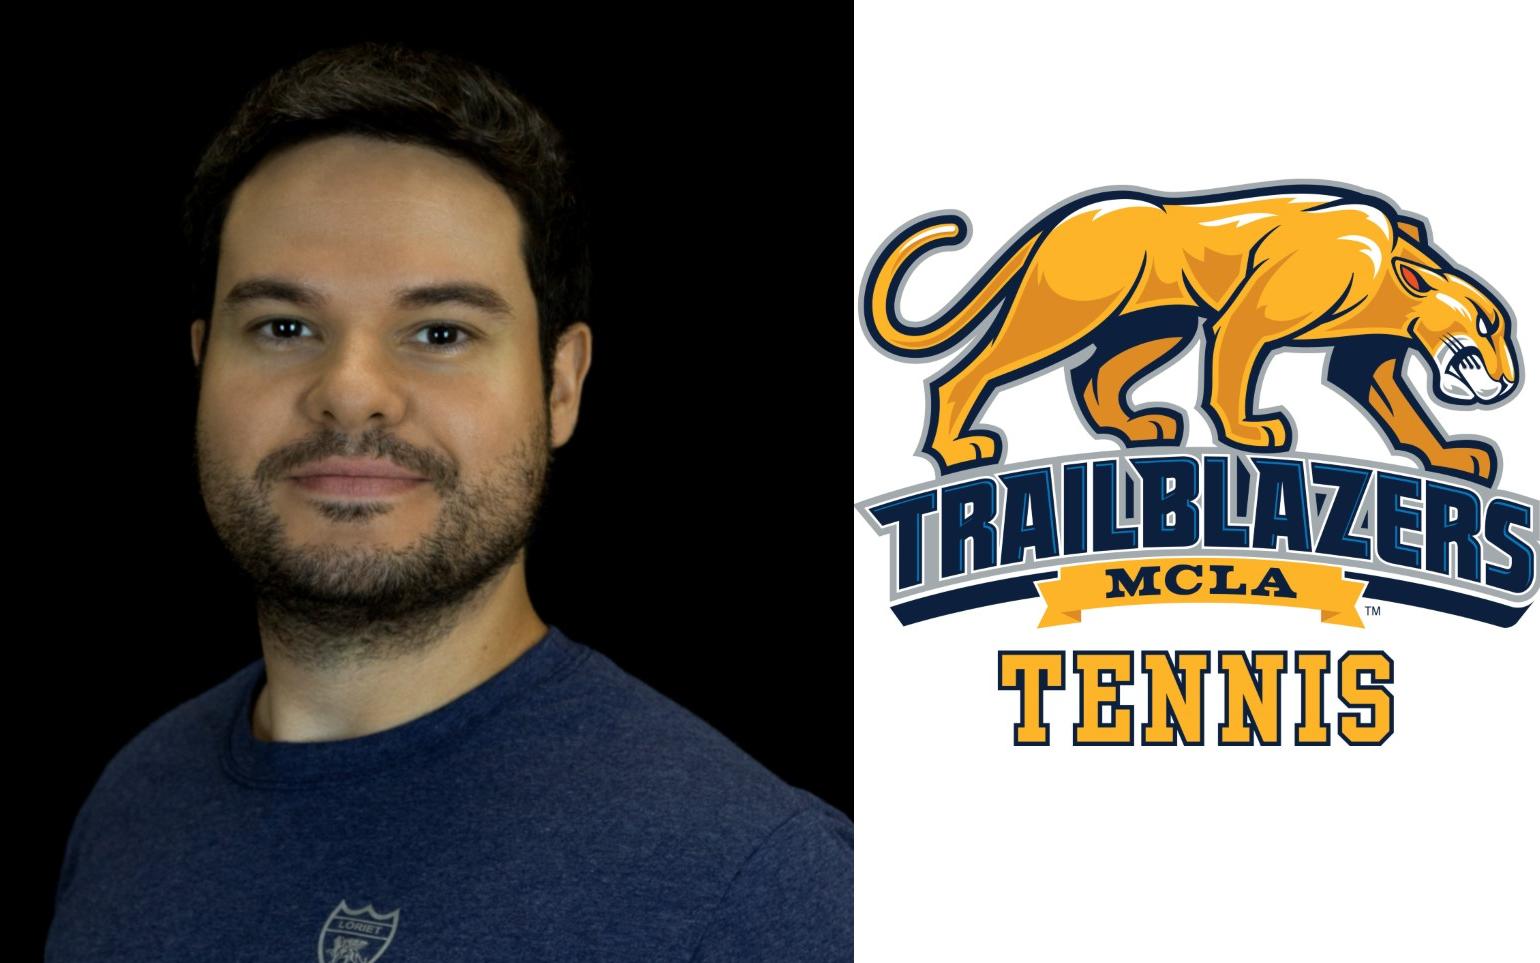 Bryant selected to lead both Tennis programs at MCLA